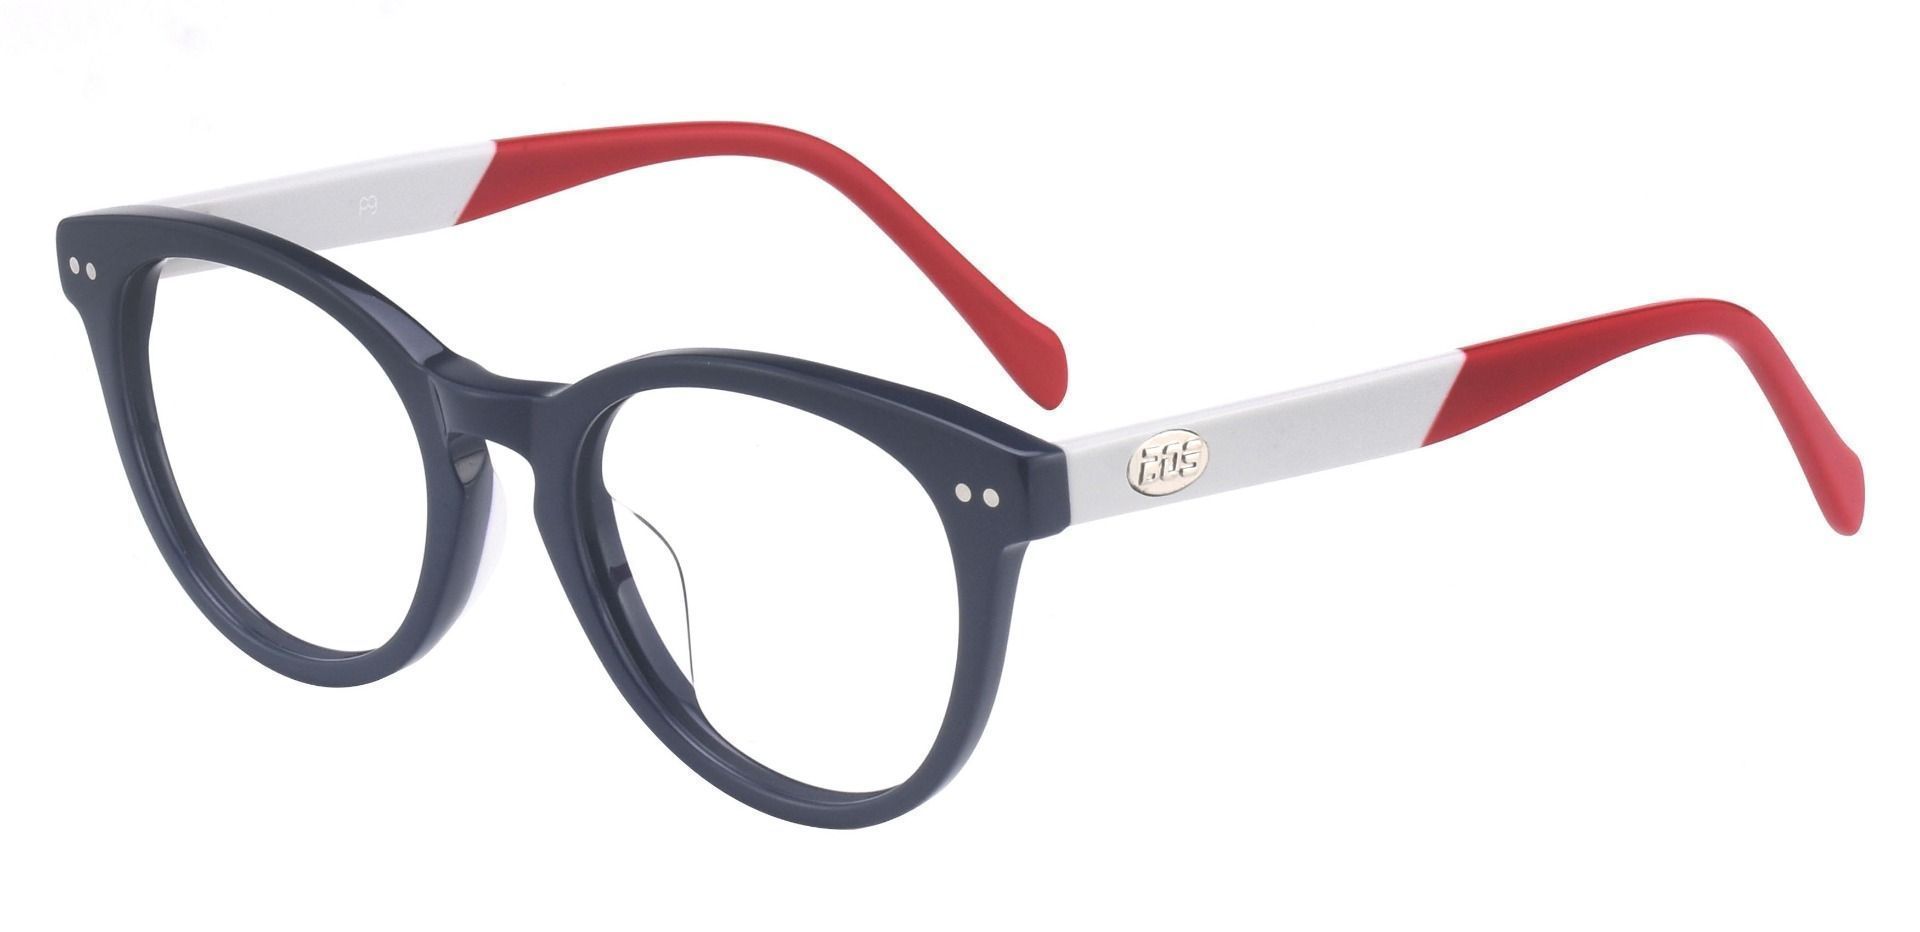 Revere Oval Non-Rx Glasses - The Frame Is Blue And Red